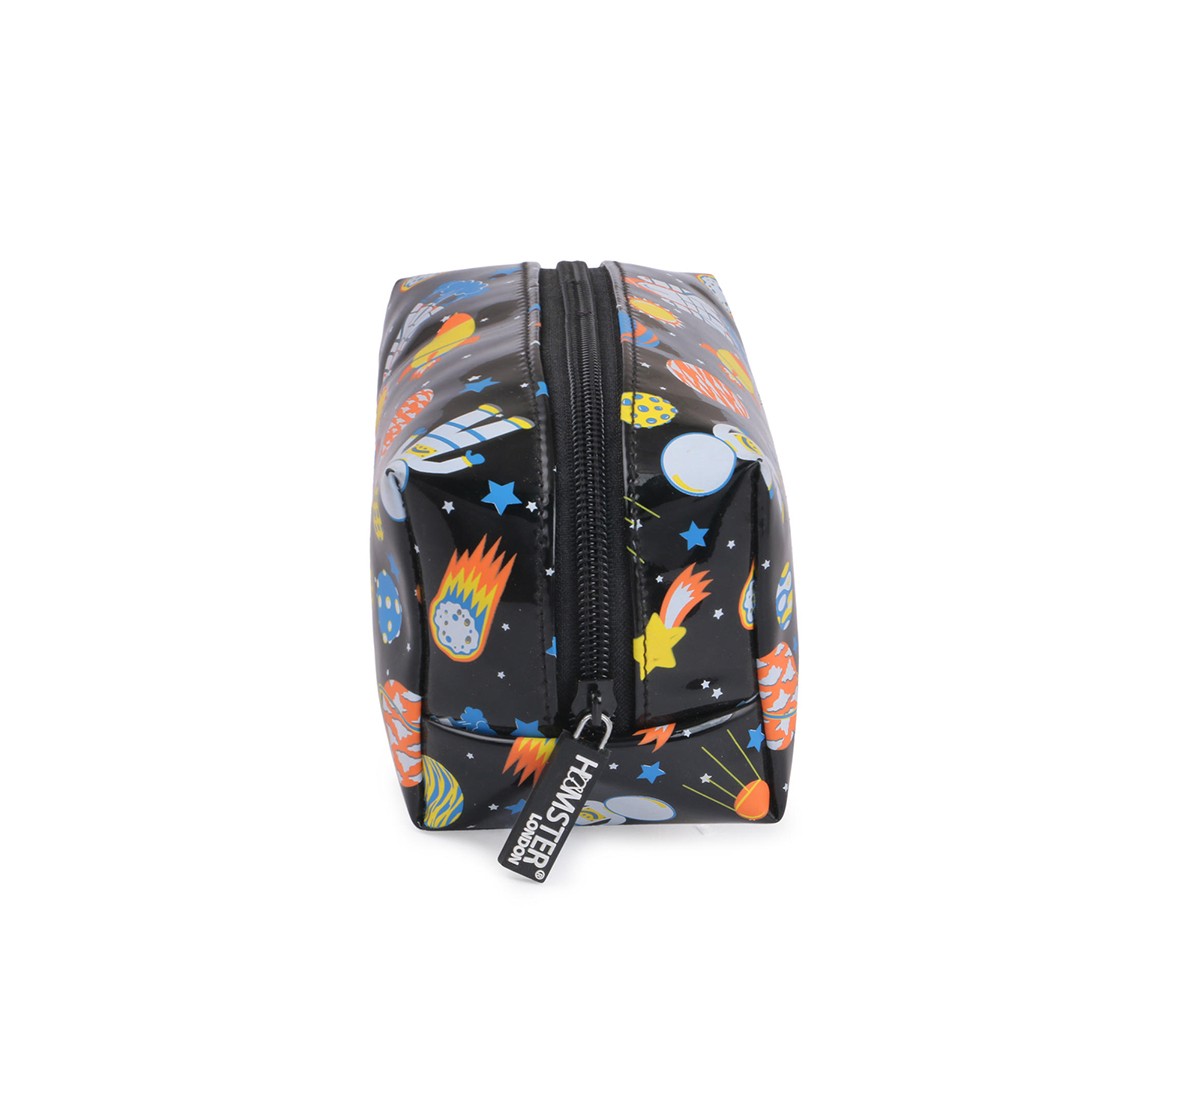 Hamster London Rectangular Space Pouch for Kids age 3Y+ (Black)